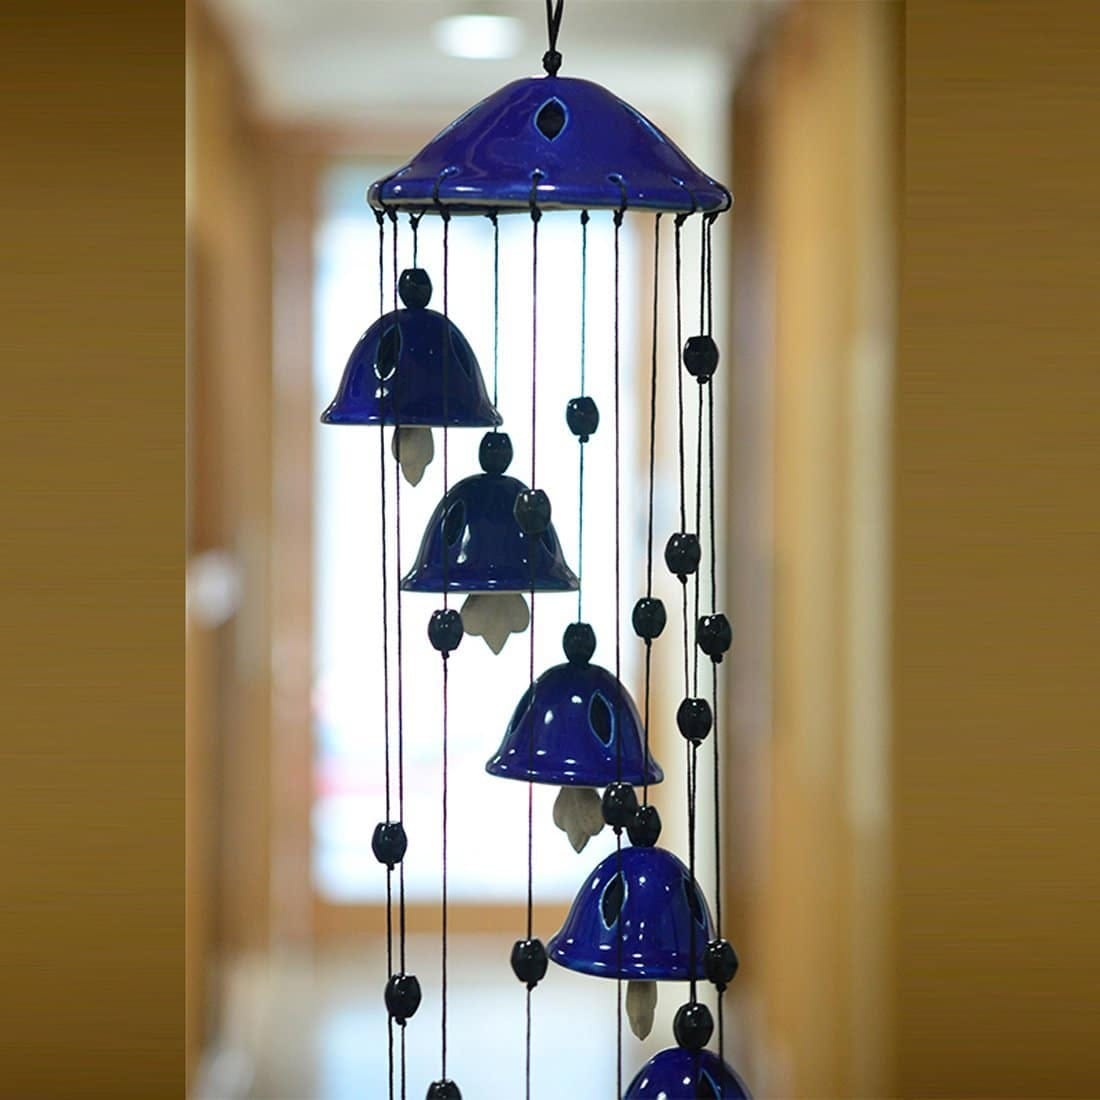 What's the best string to use for wind chimes?